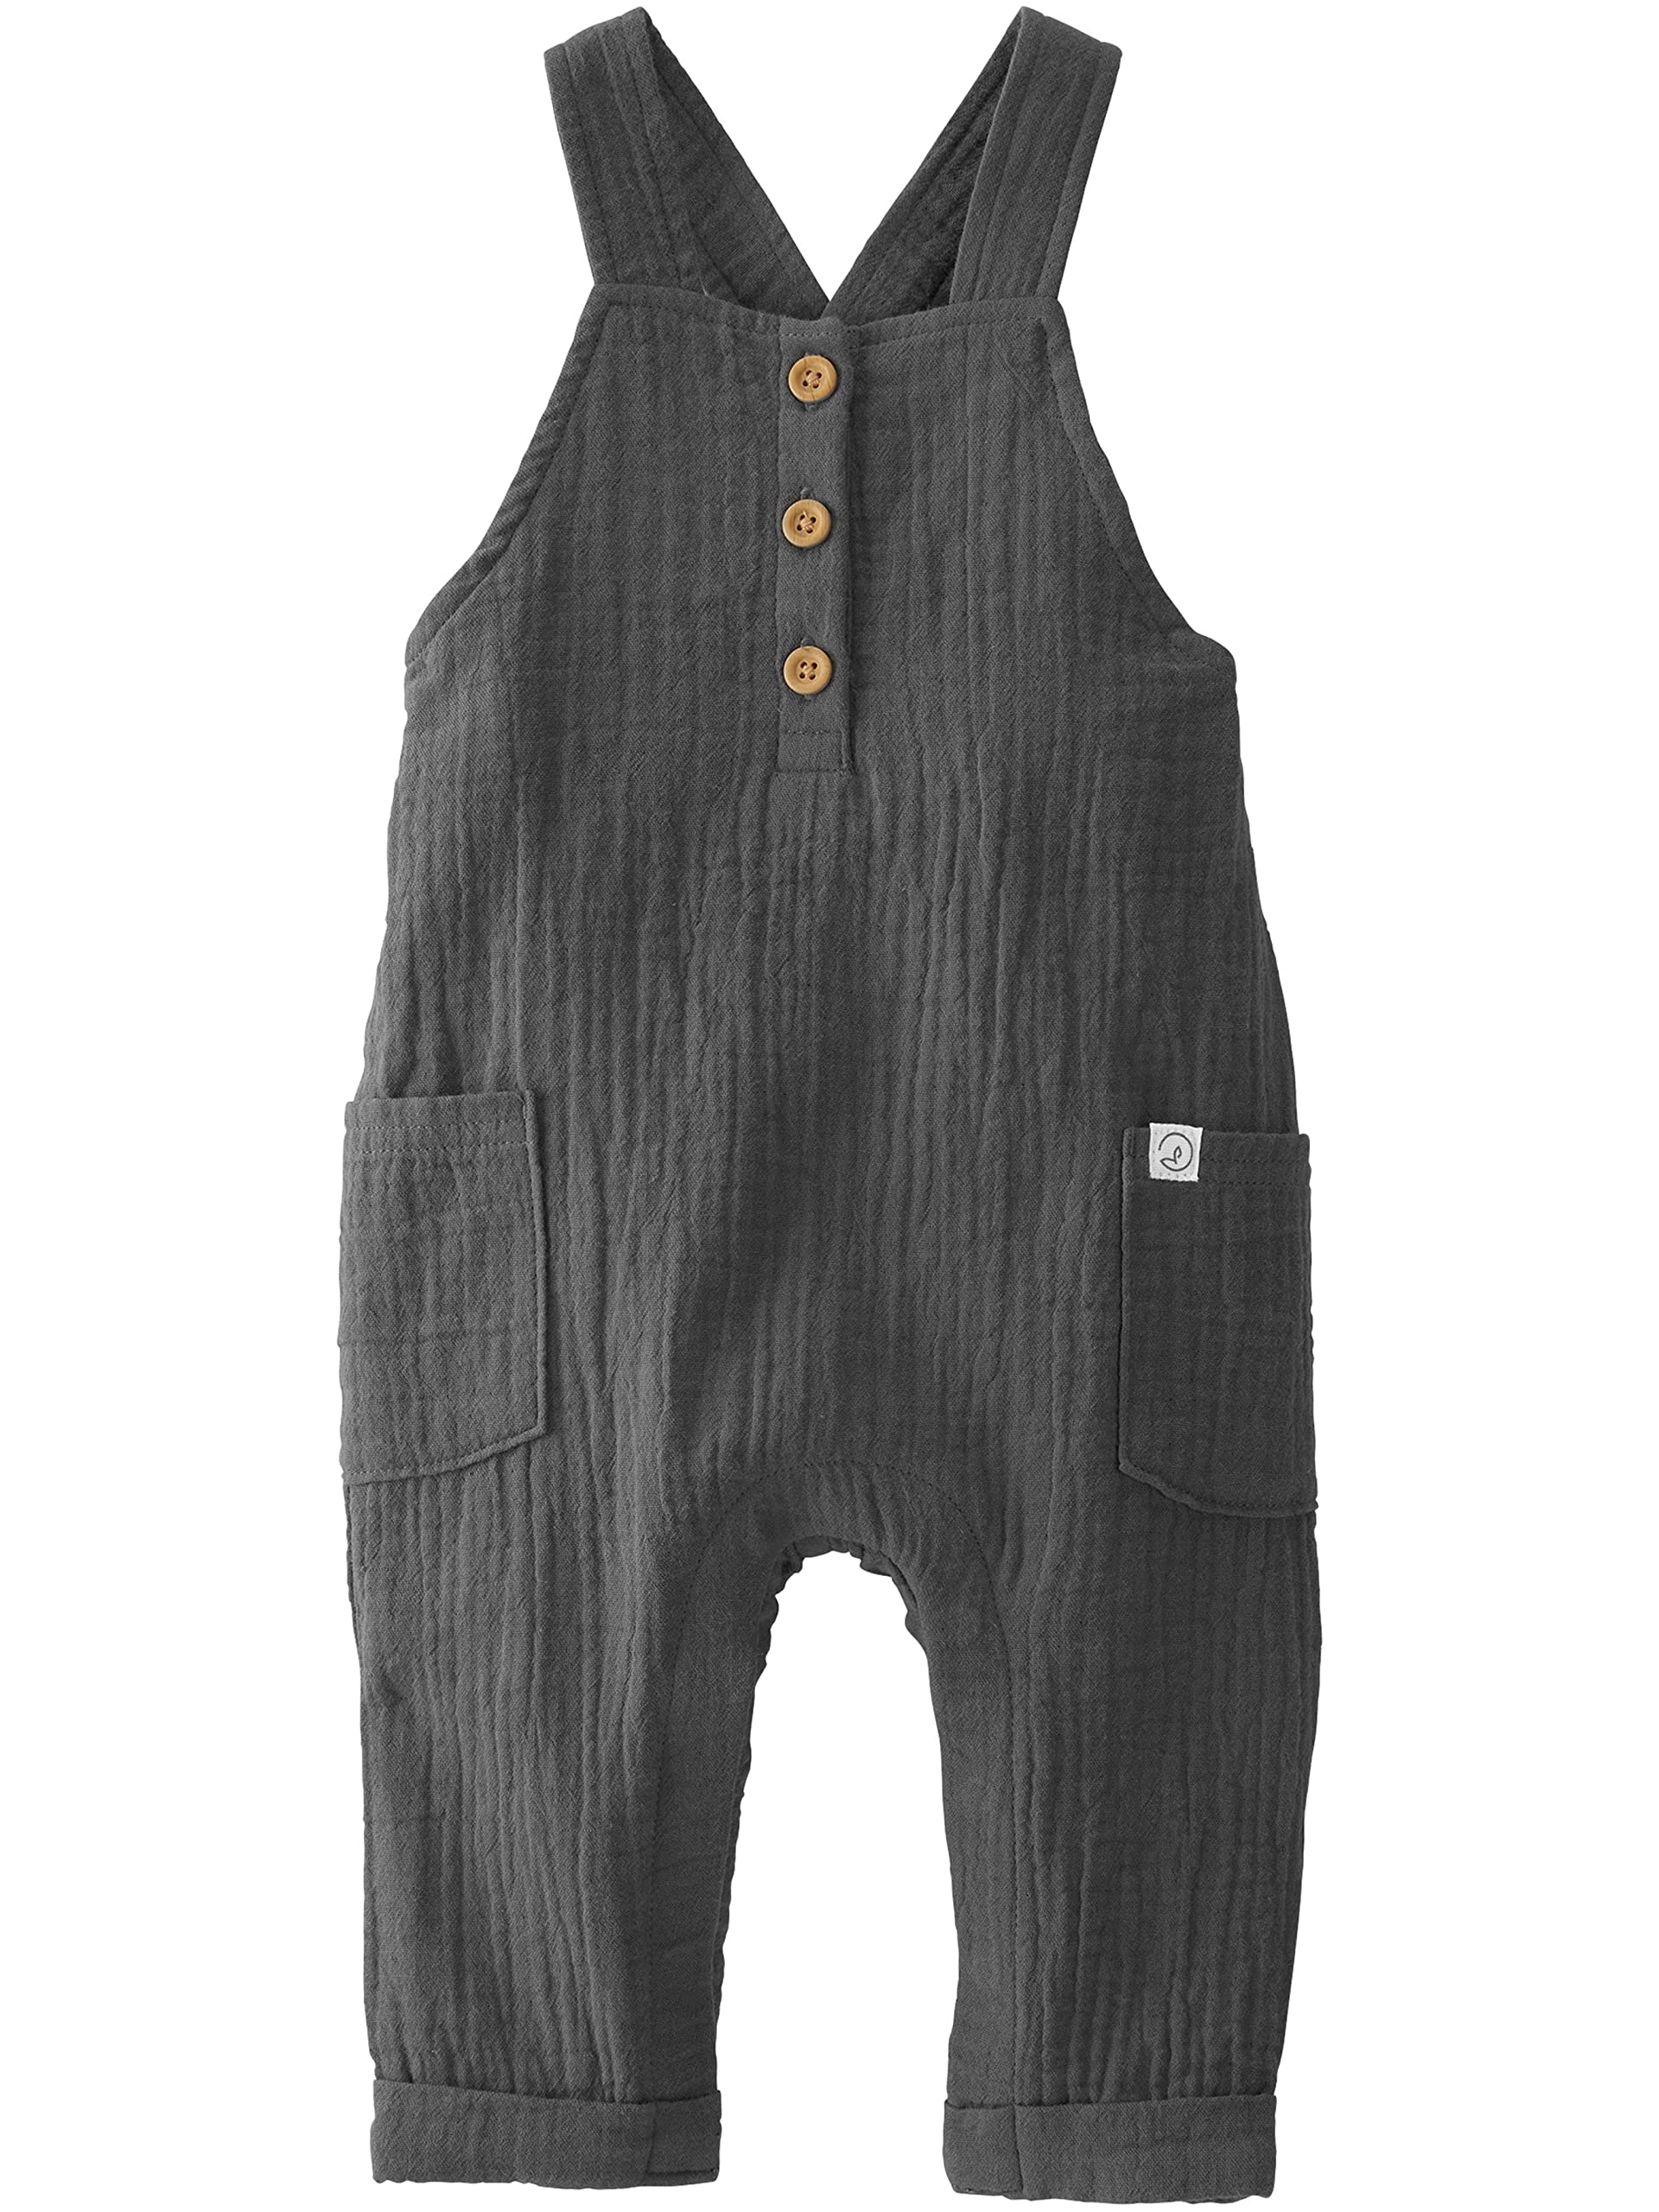 little planet by carter's Organic Cotton Gauze Overall Jumpsuit, Charcoal, 12M